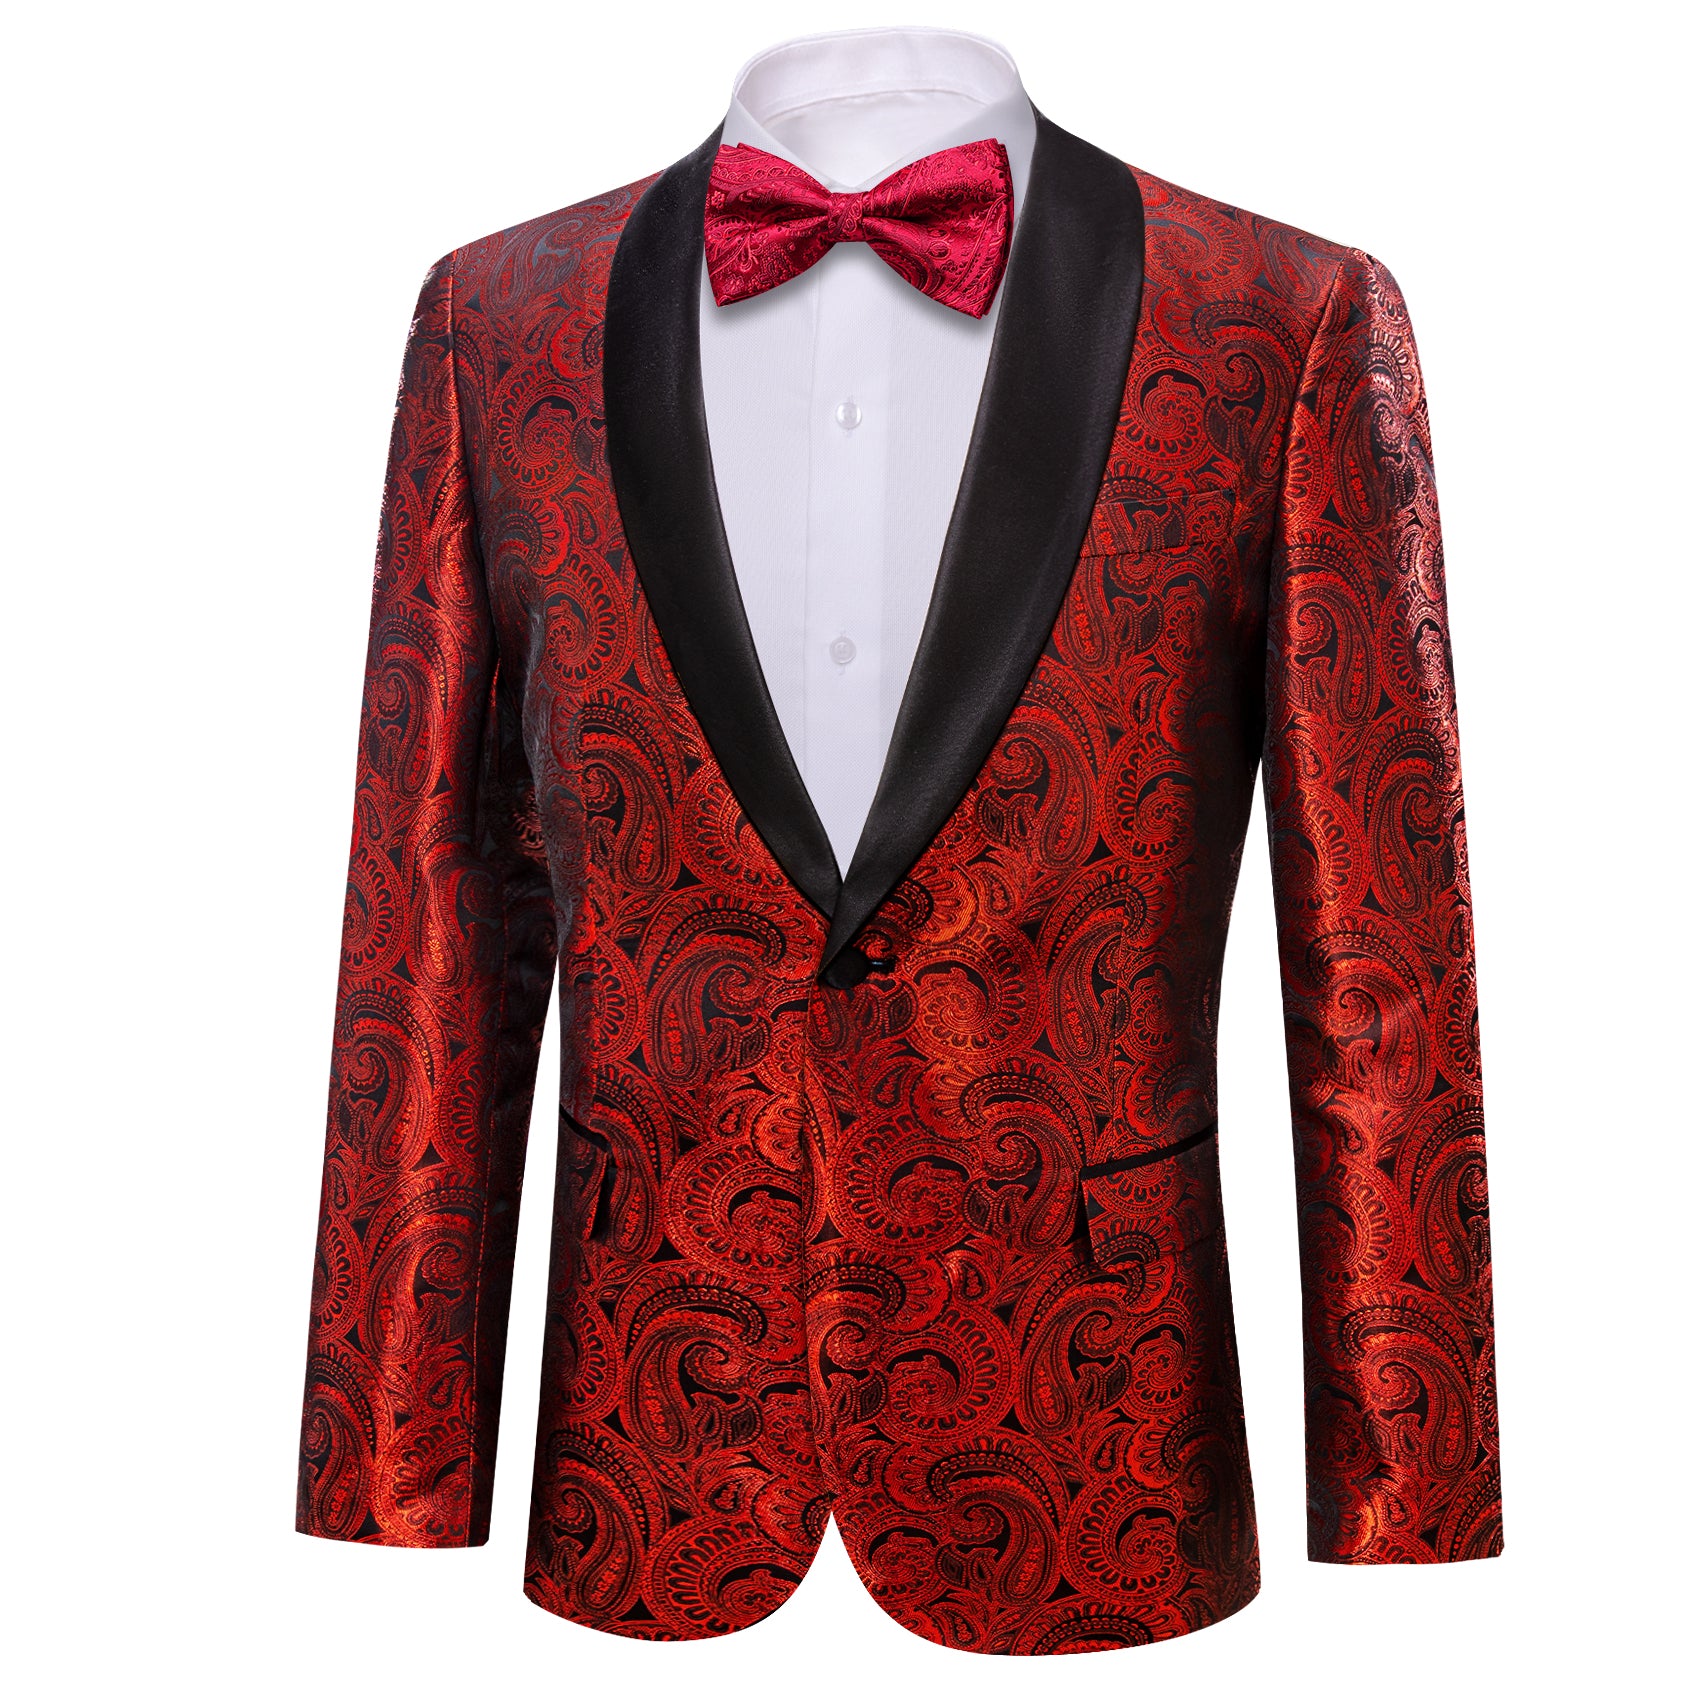 red paisley blazer for party